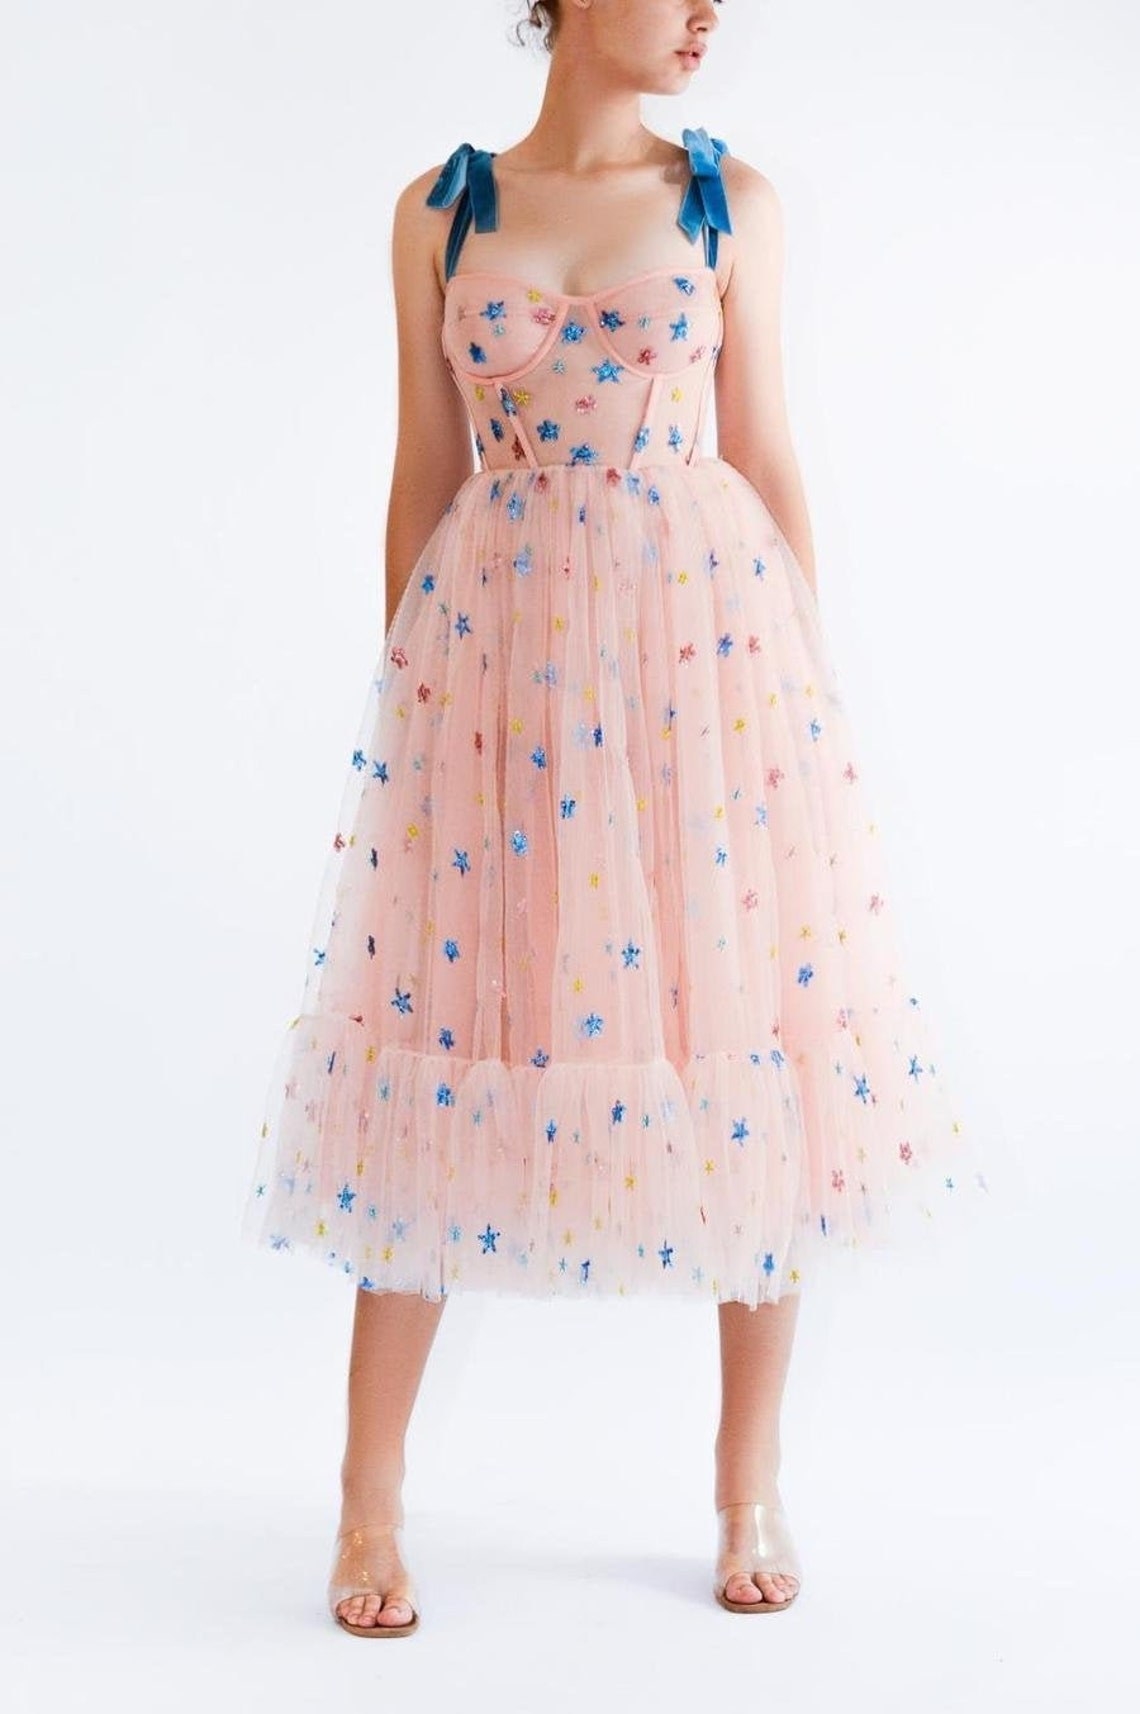 pink dress with blue stars